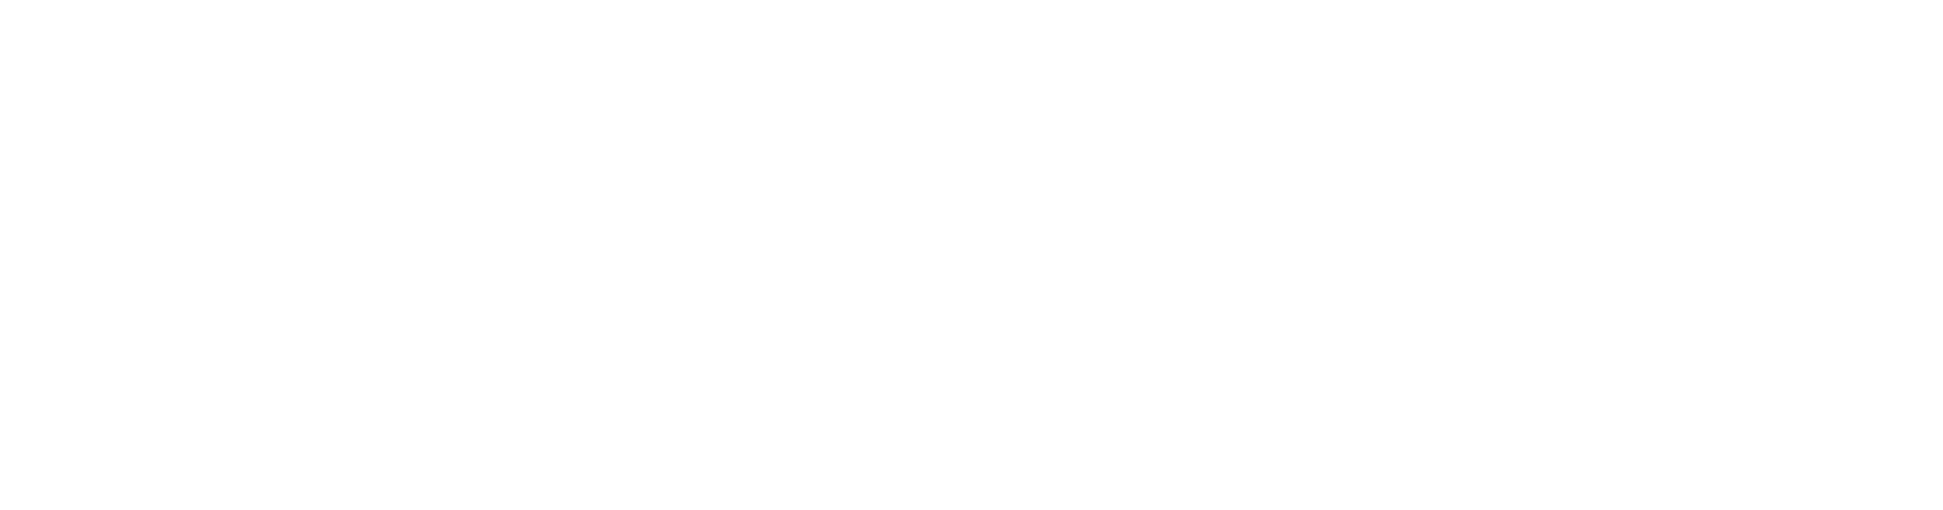 Announcing RPG MAKER WITH!